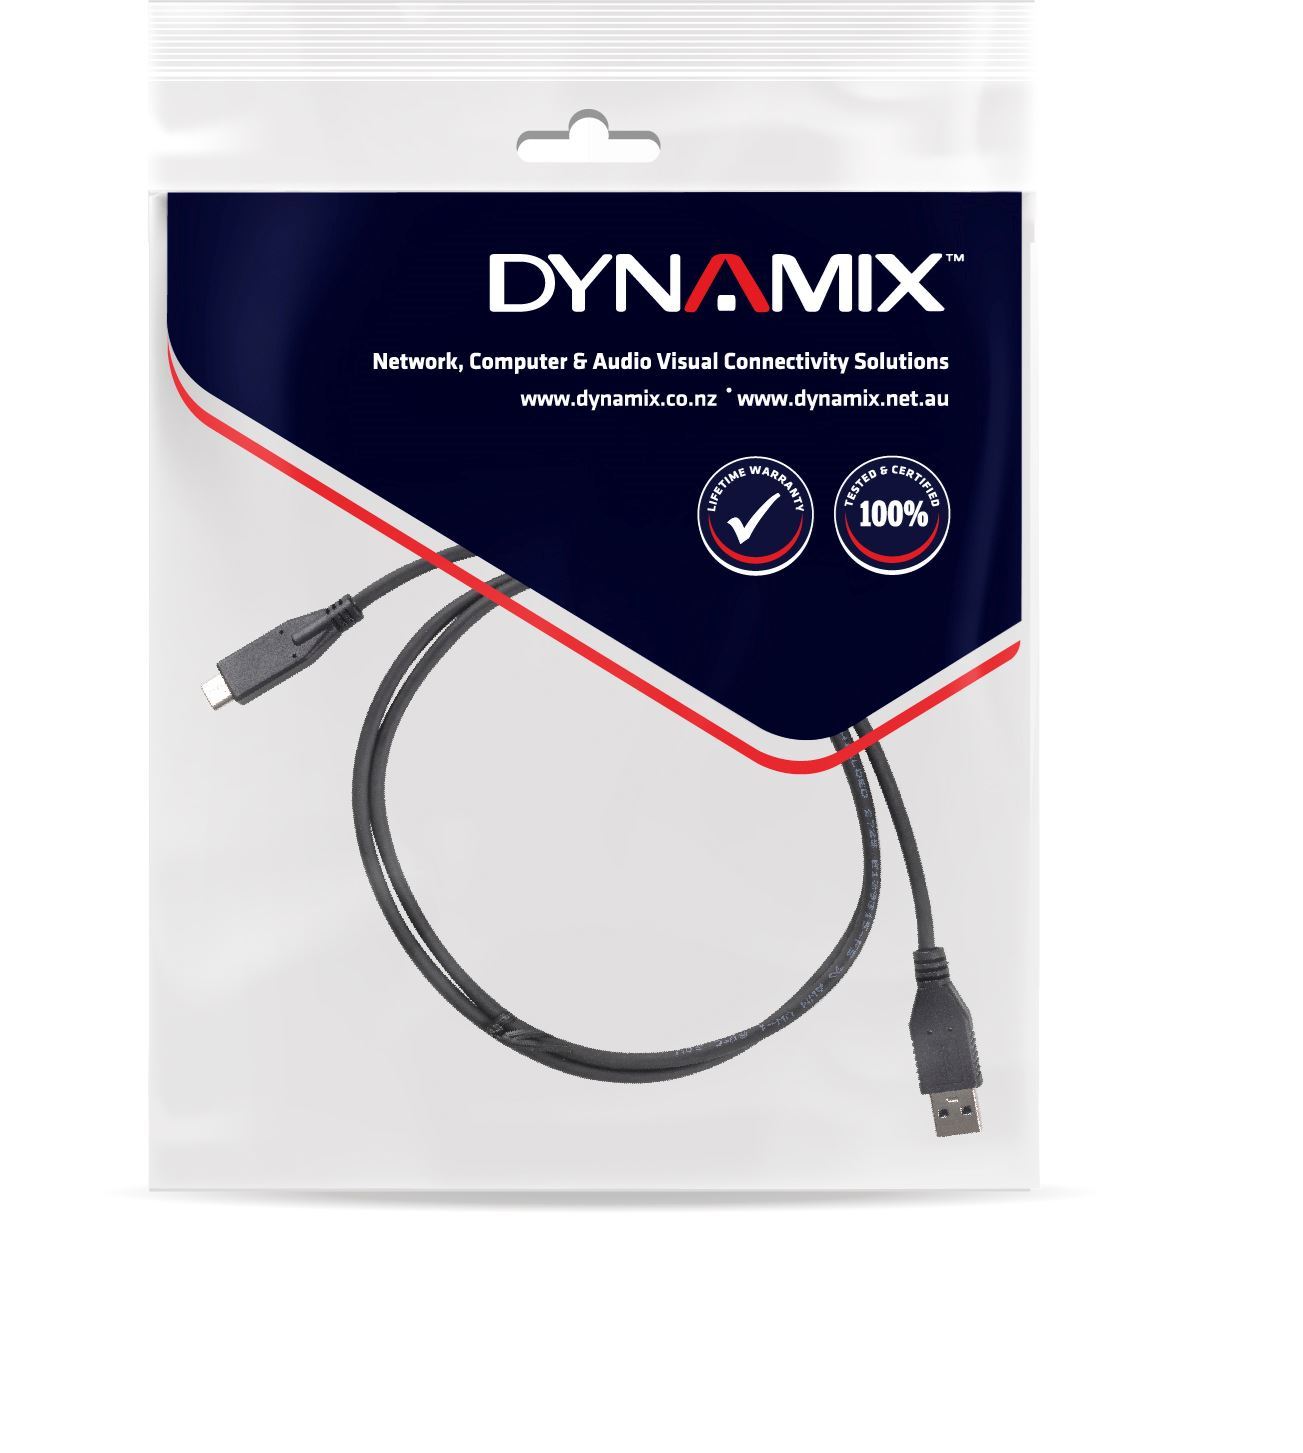 DYNAMIX_0.2M,_USB_3.1_USB-C_Male_to_USB-A_Male_Cable._Black_Colour._Up_to_10G_Data_Transfer_Speed,_Supports_3A_Current. 1133